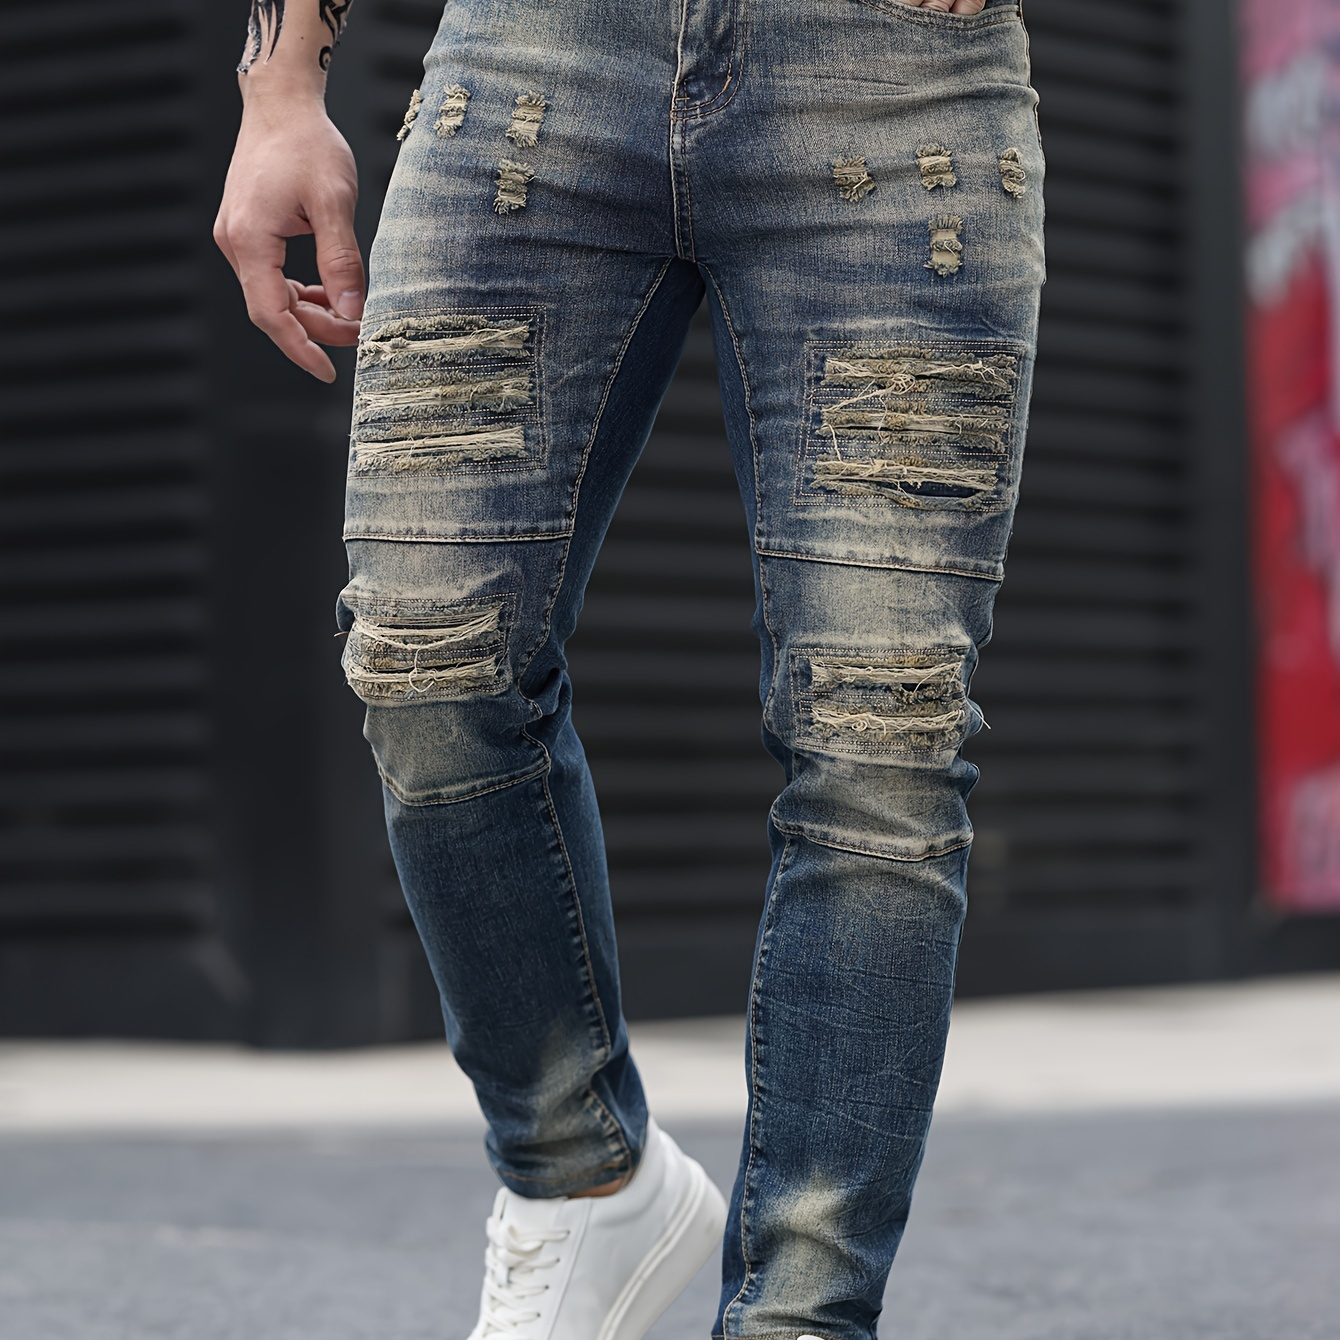 

Men's Fashion Distressed Ripped Skinny Jeans, Vintage Washed Denim Street Style Slim-fit Tapered Leg Casual Pants, Versatile & Comfortable Long Trousers